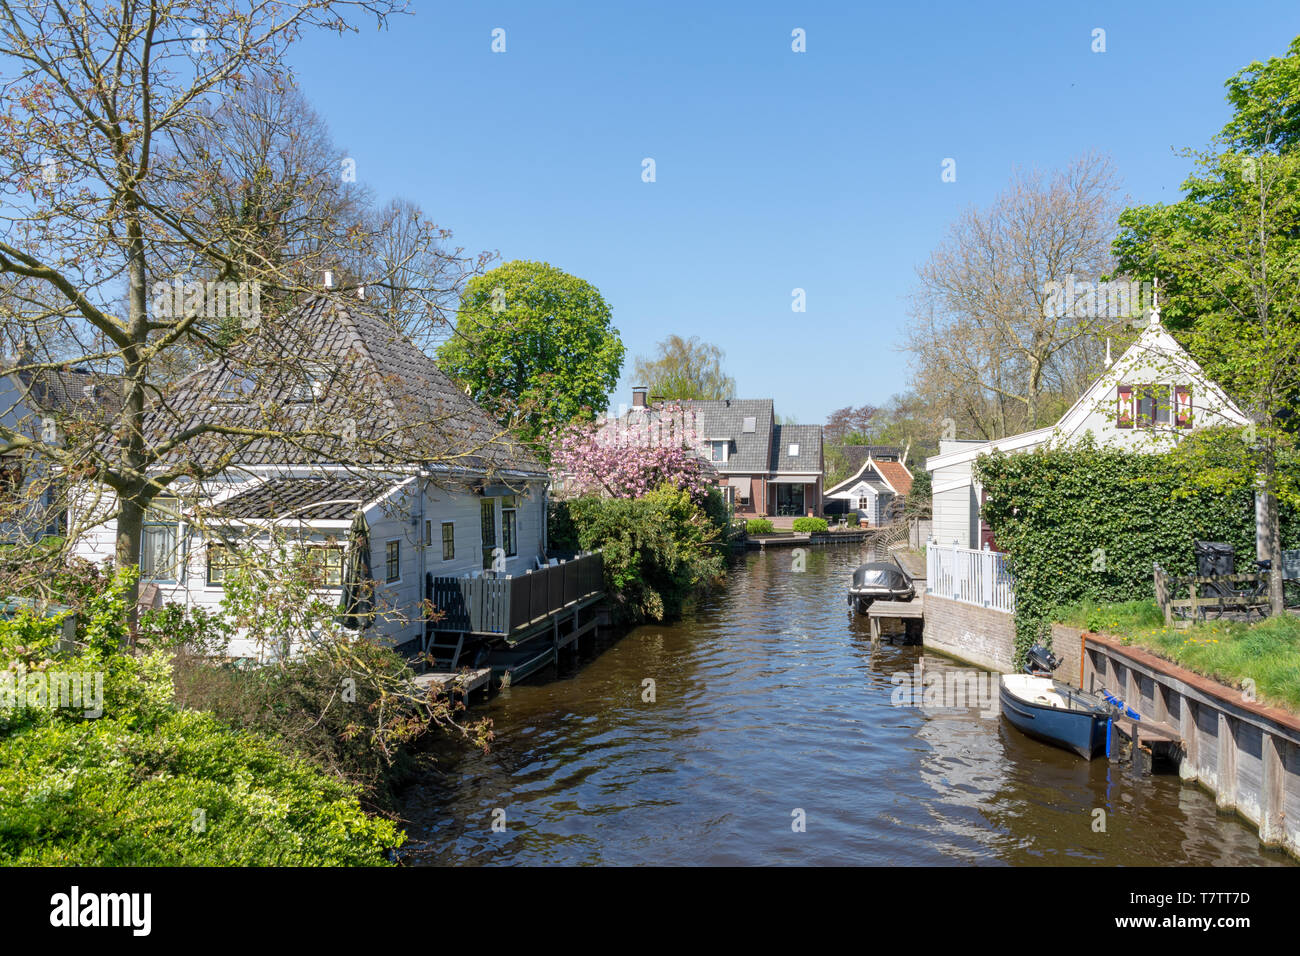 Small river in Broek in Waterland, The Netherlands Stock Photo